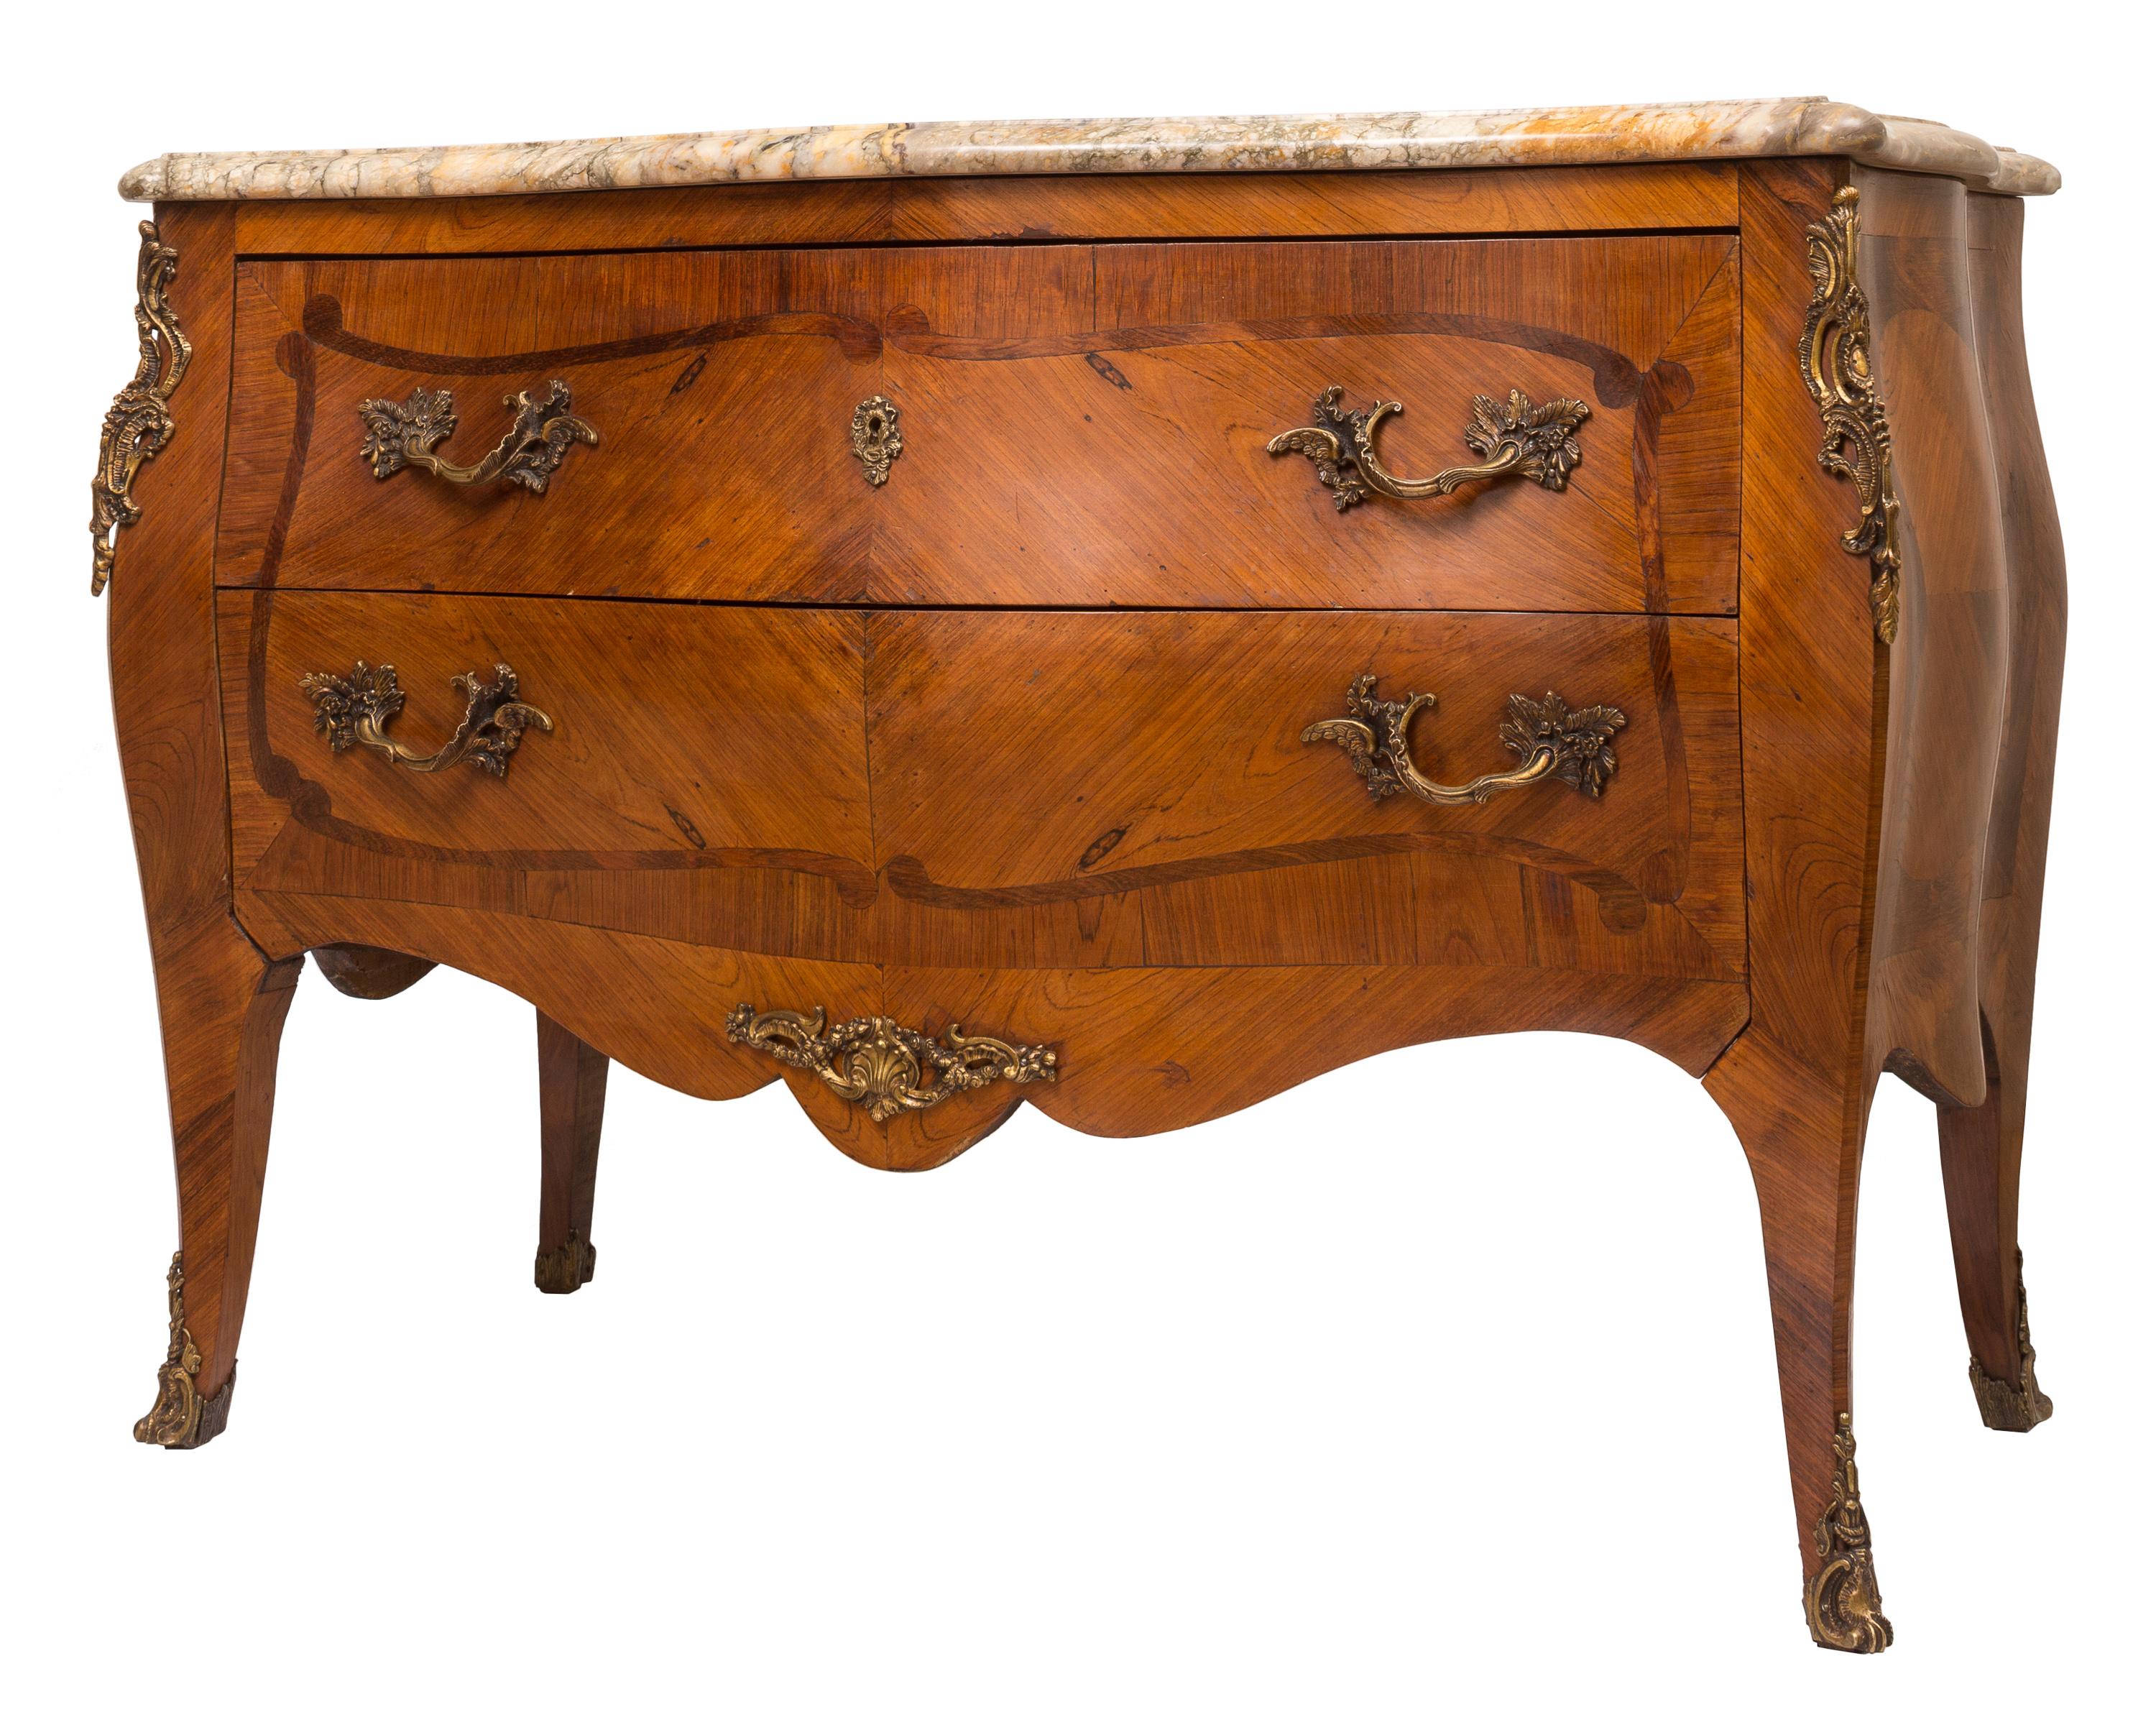 A nicely proportioned 19th century French Louis XV style bombe commode, featuring elegantly curved front and sides embellished with marquetry inlay and ormolu bronze fittings. Topped with a single marble slab, it has two spacious drawers making it a